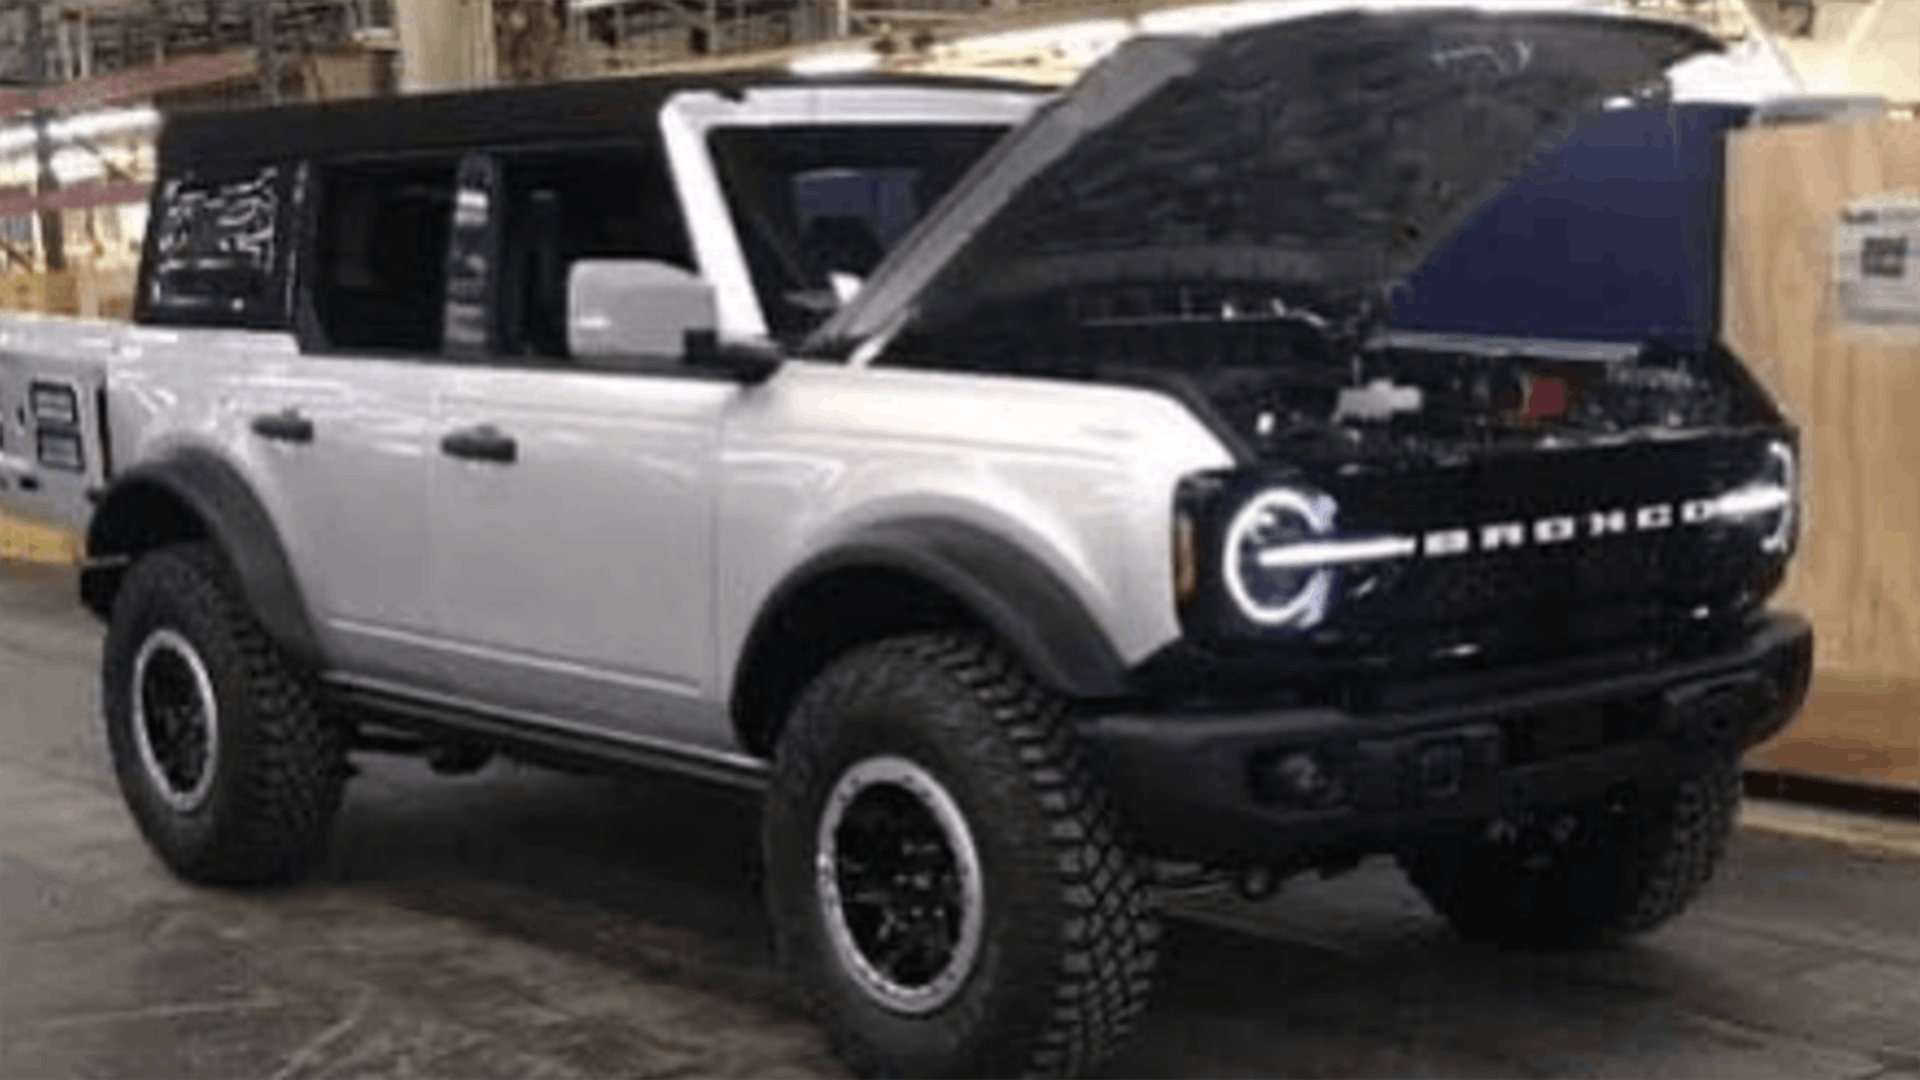 Reasons Not To Like The 2021 Ford Bronco